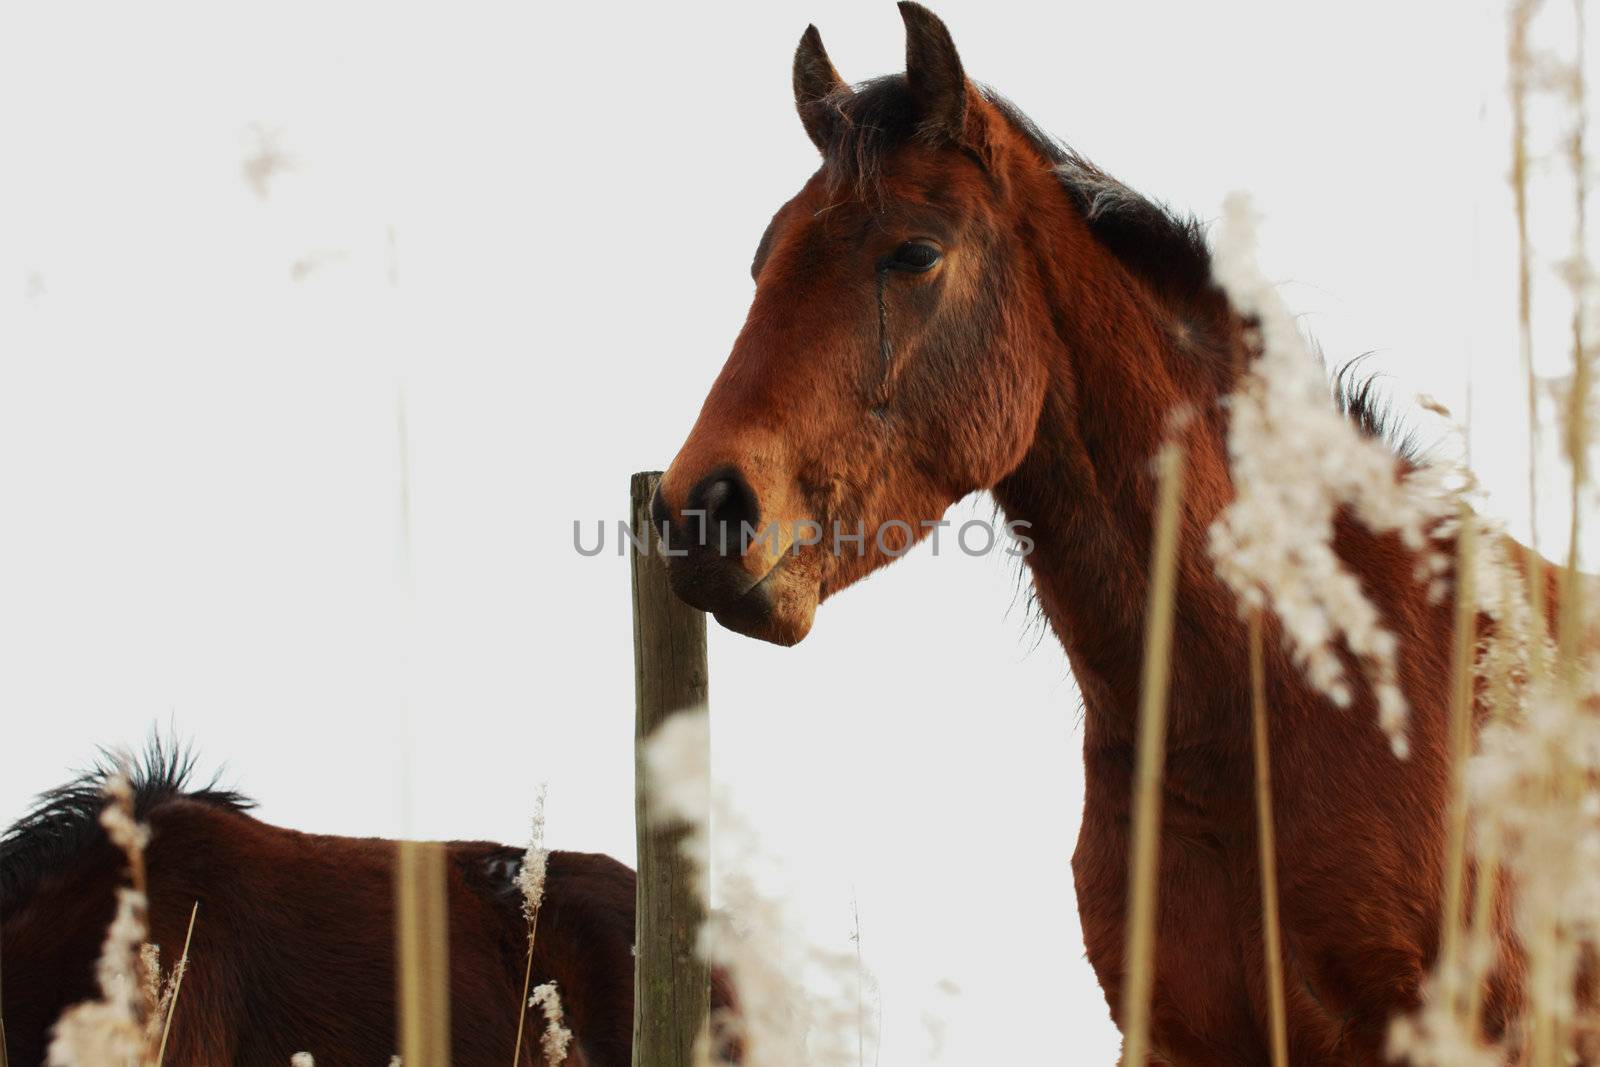 horse portrait in the natural environment with dry plant